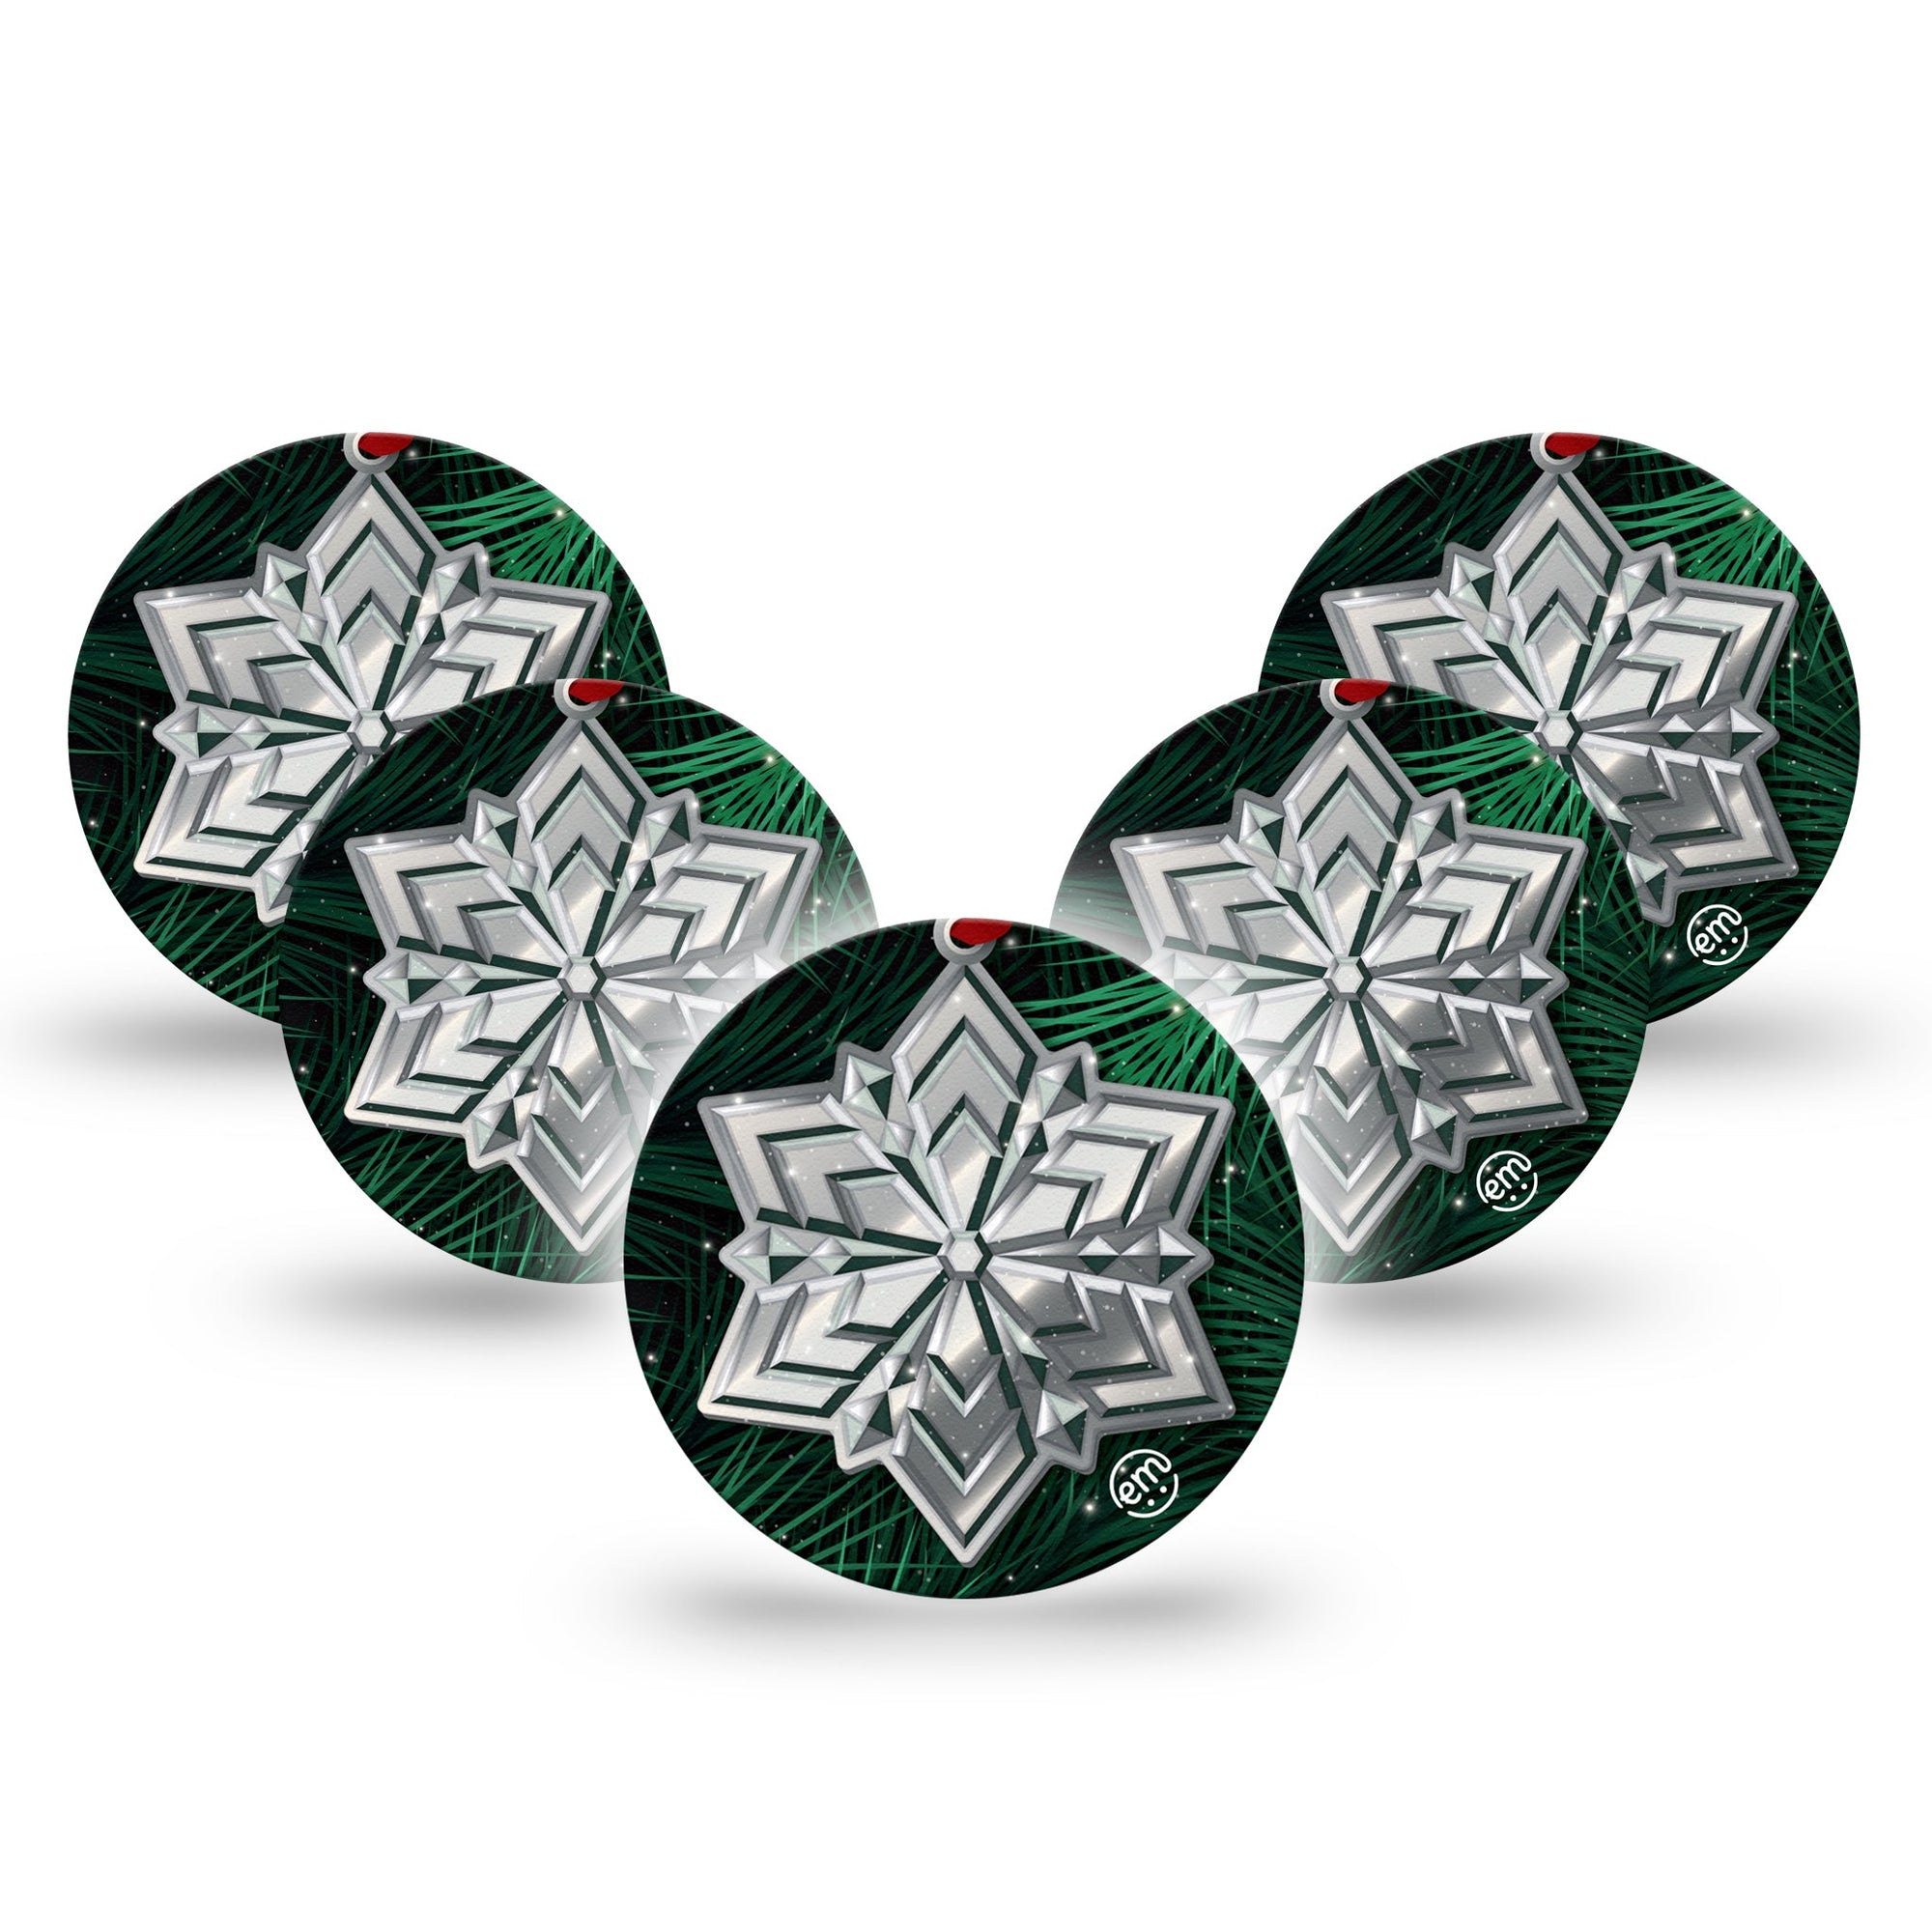 ExpressionMed Metallic Snowflake Libre 3 Overpatch 5-Pack Christmas Iron Crystal Decor, CGM Plaster Tape Design